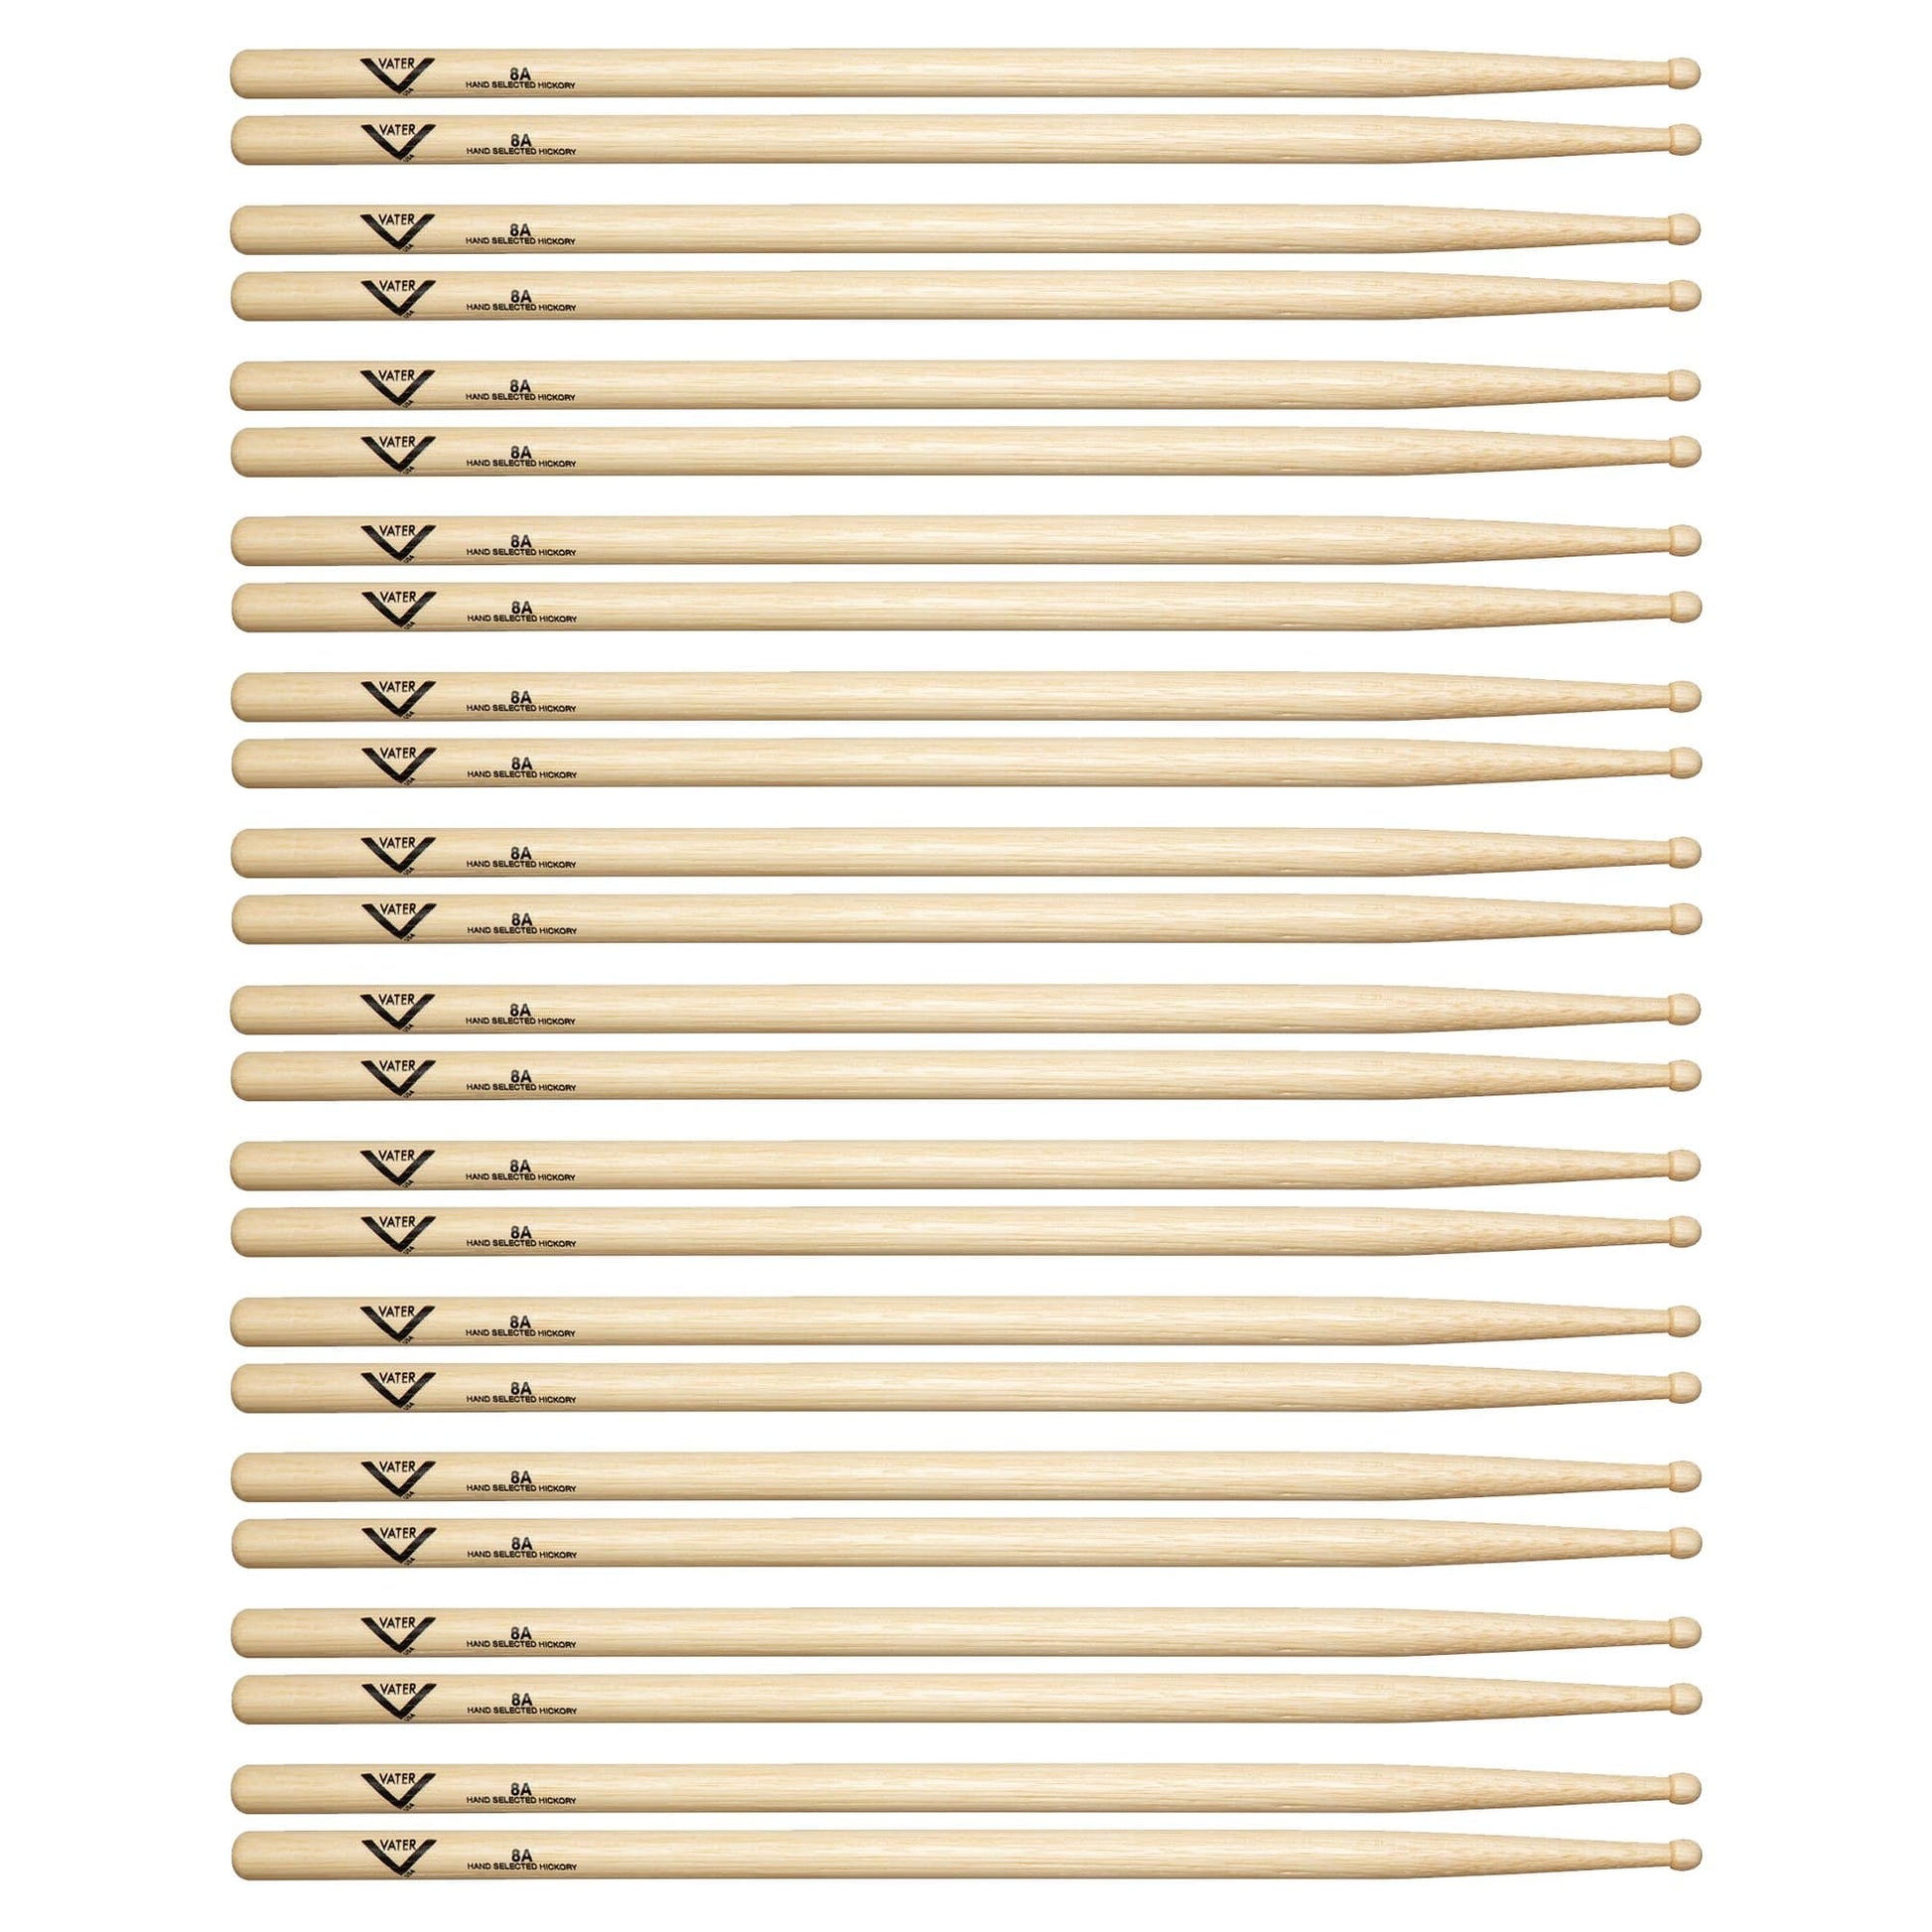 Vater Hickory 8A Wood Tip Drum Sticks (12 Pair Bundle) Drums and Percussion / Parts and Accessories / Drum Sticks and Mallets